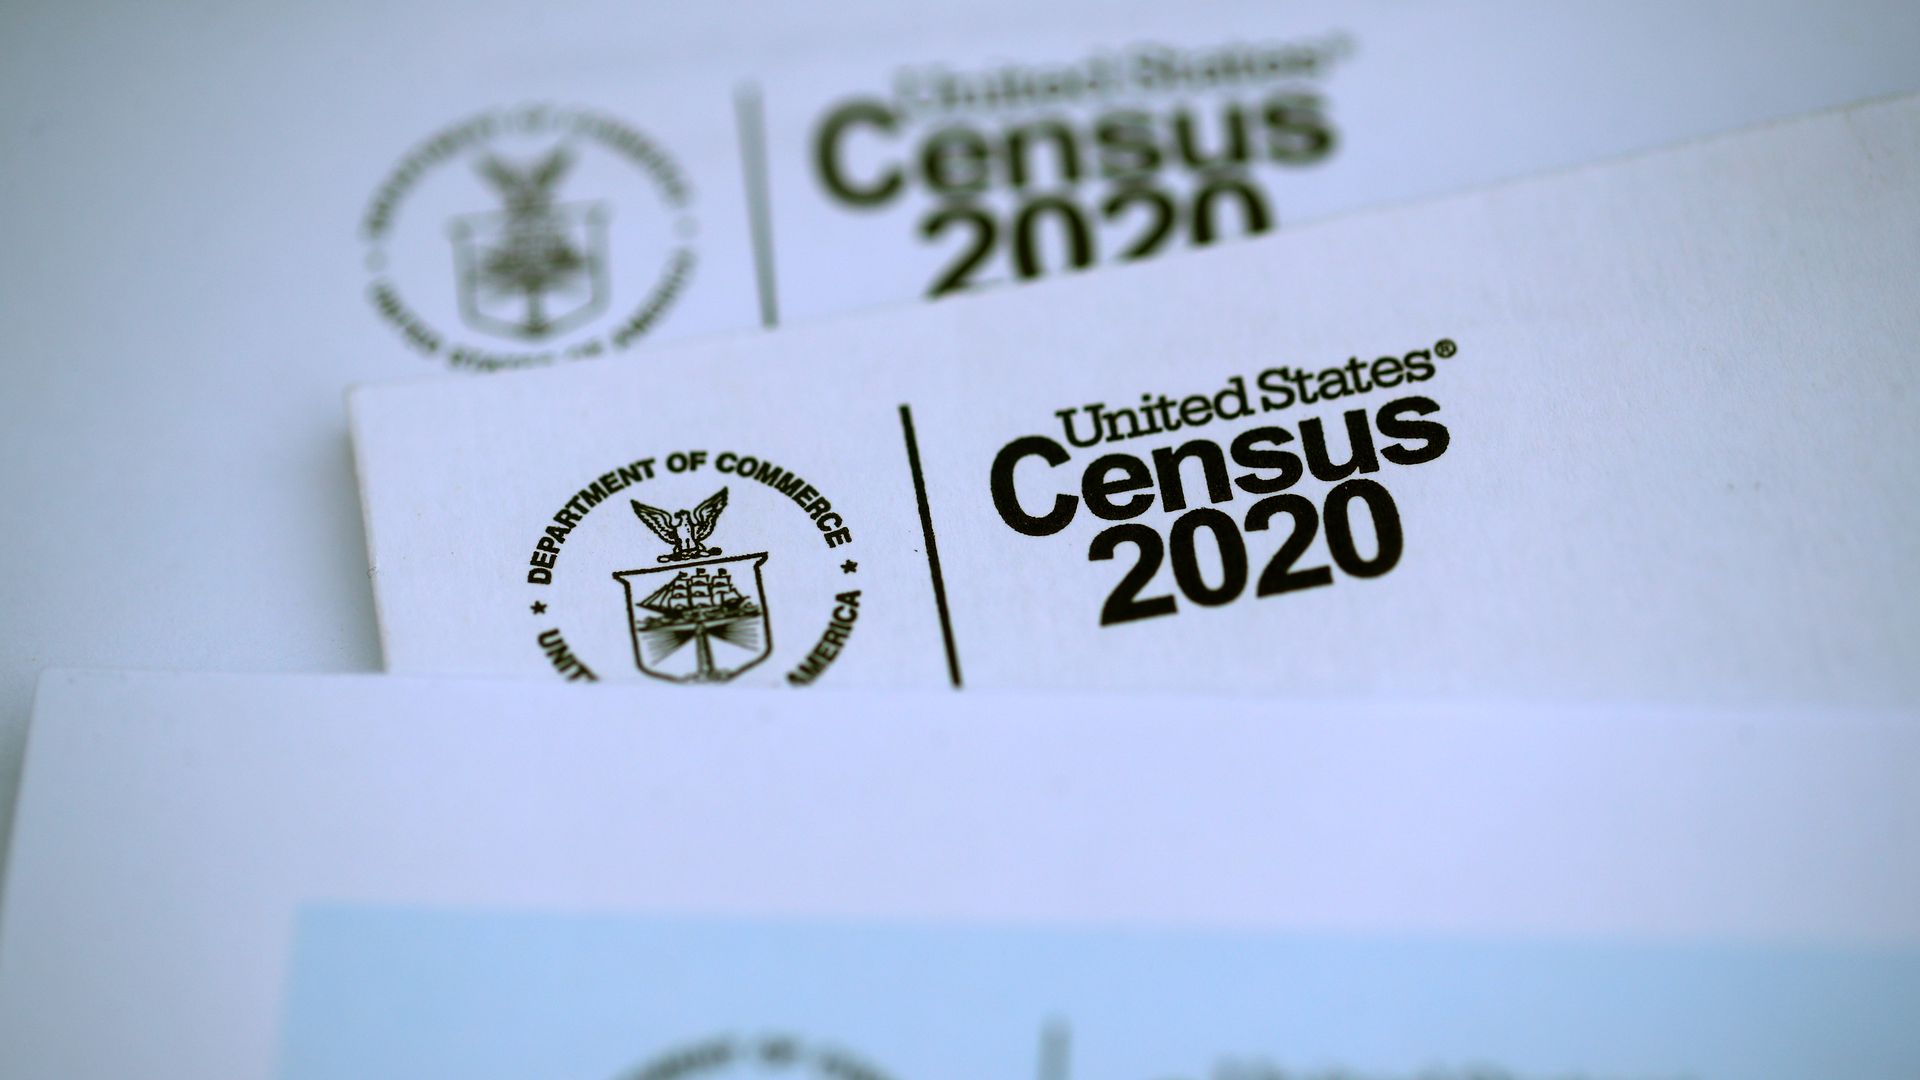 The U.S. Census logo appears on census materials received in the mail with an invitation